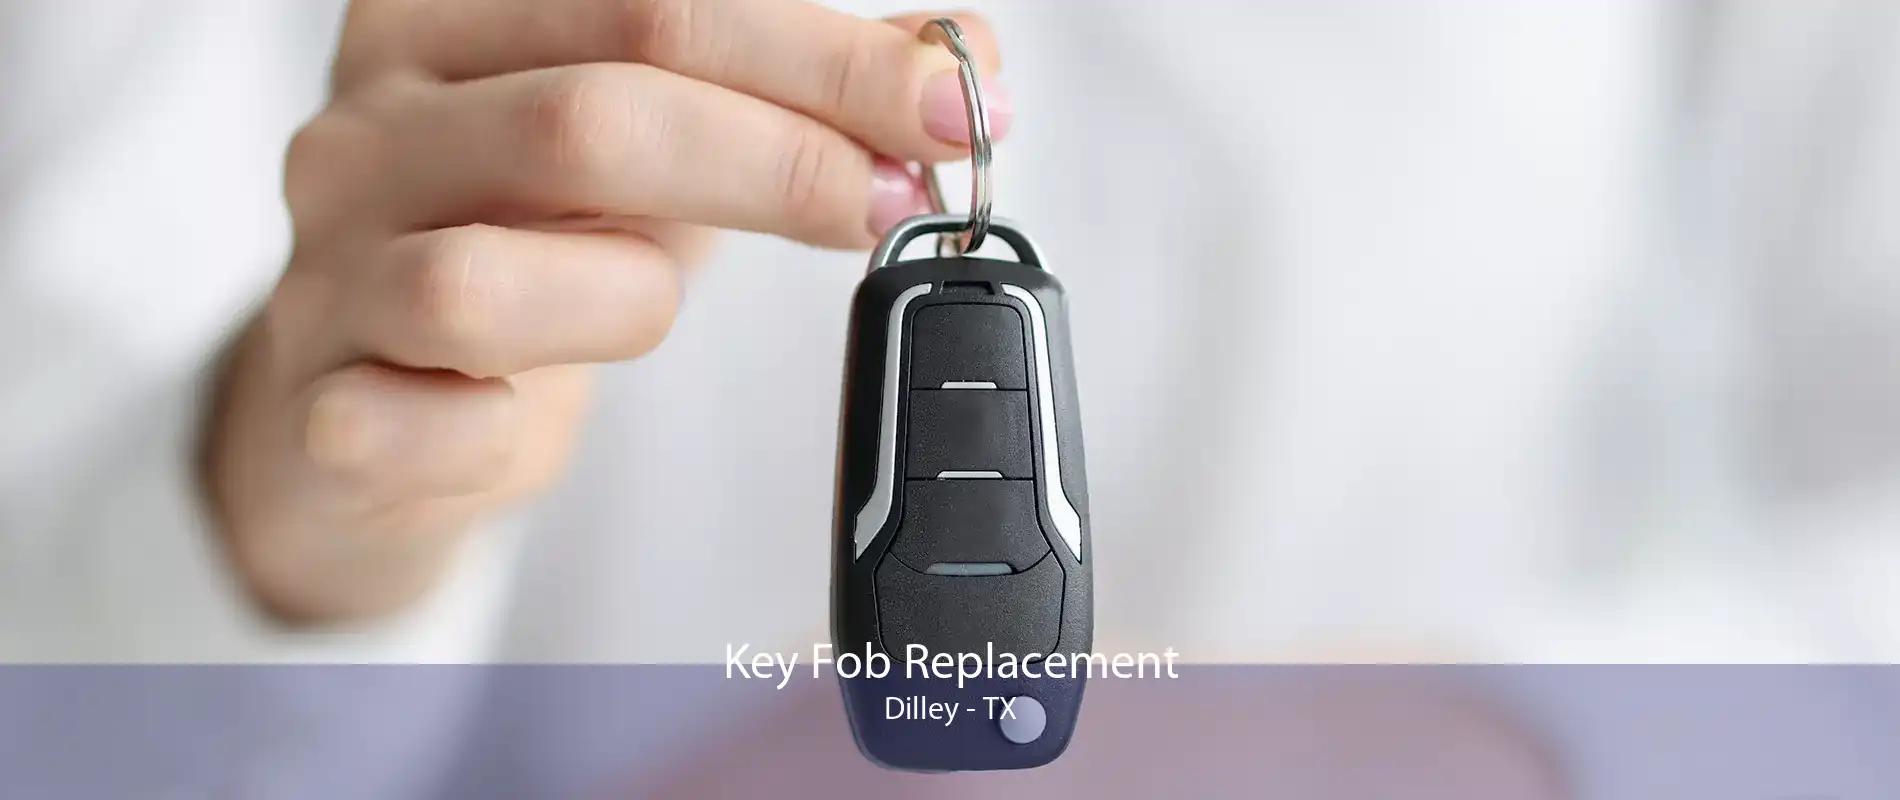 Key Fob Replacement Dilley - TX